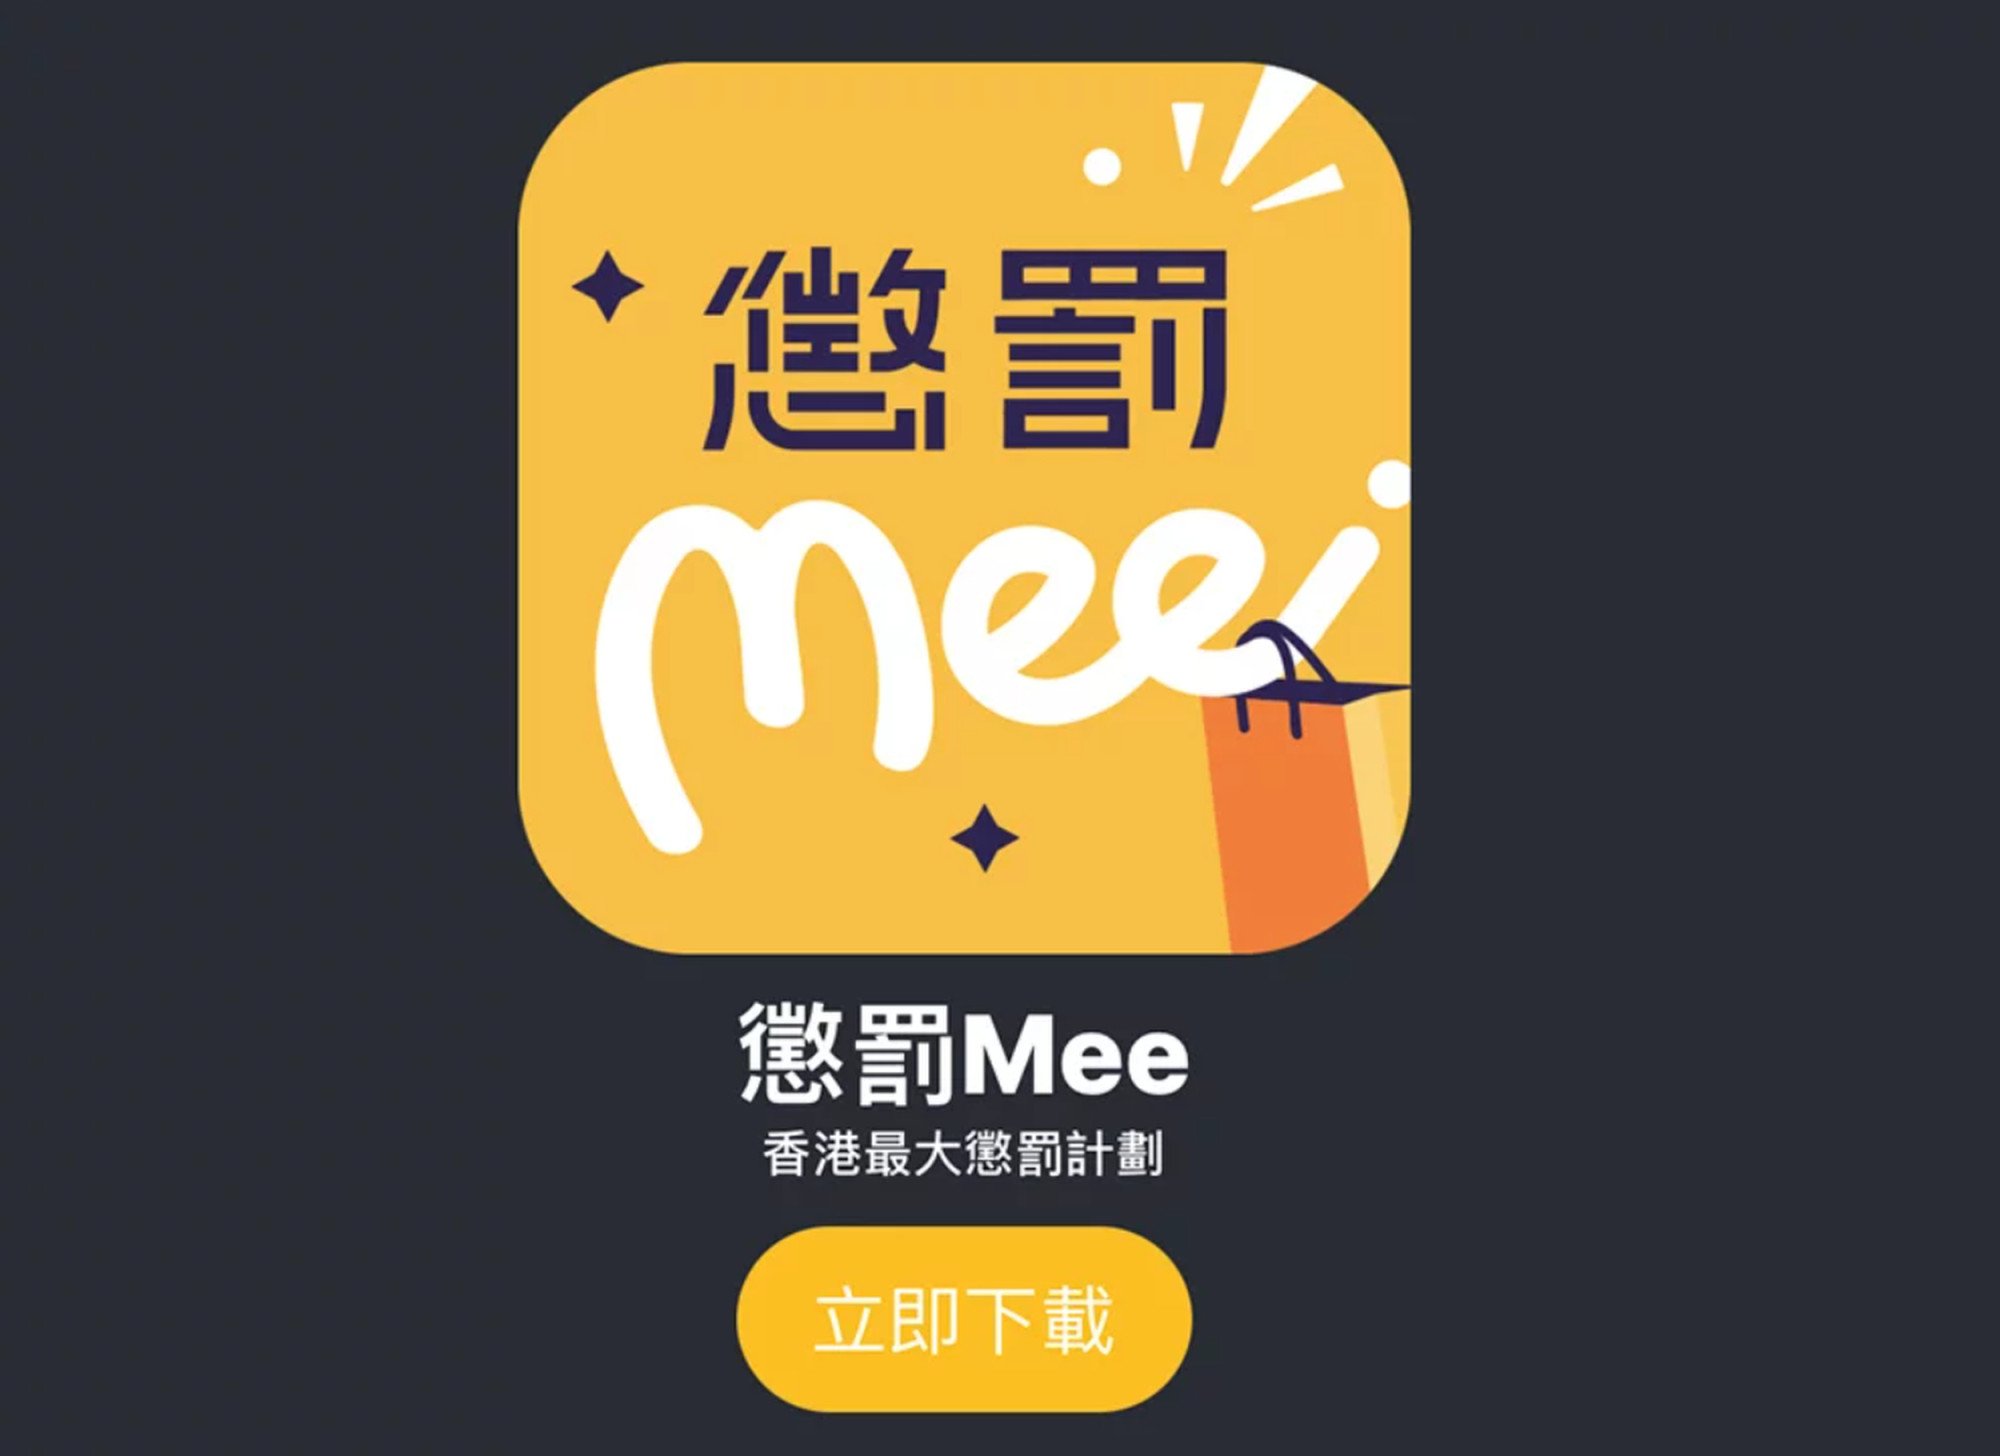 The Mee app is no longer available on major online stores. Photo: Handout